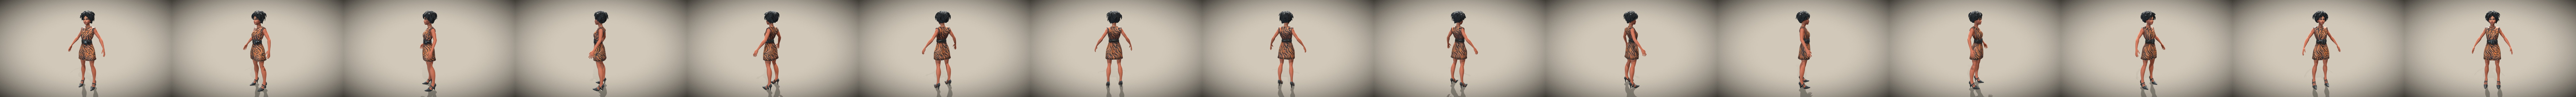 Ready Player Me female avatar  VRChat/Game - Download Free 3D model by  Ready Player Me (@readyplayerme) [7ec058e]